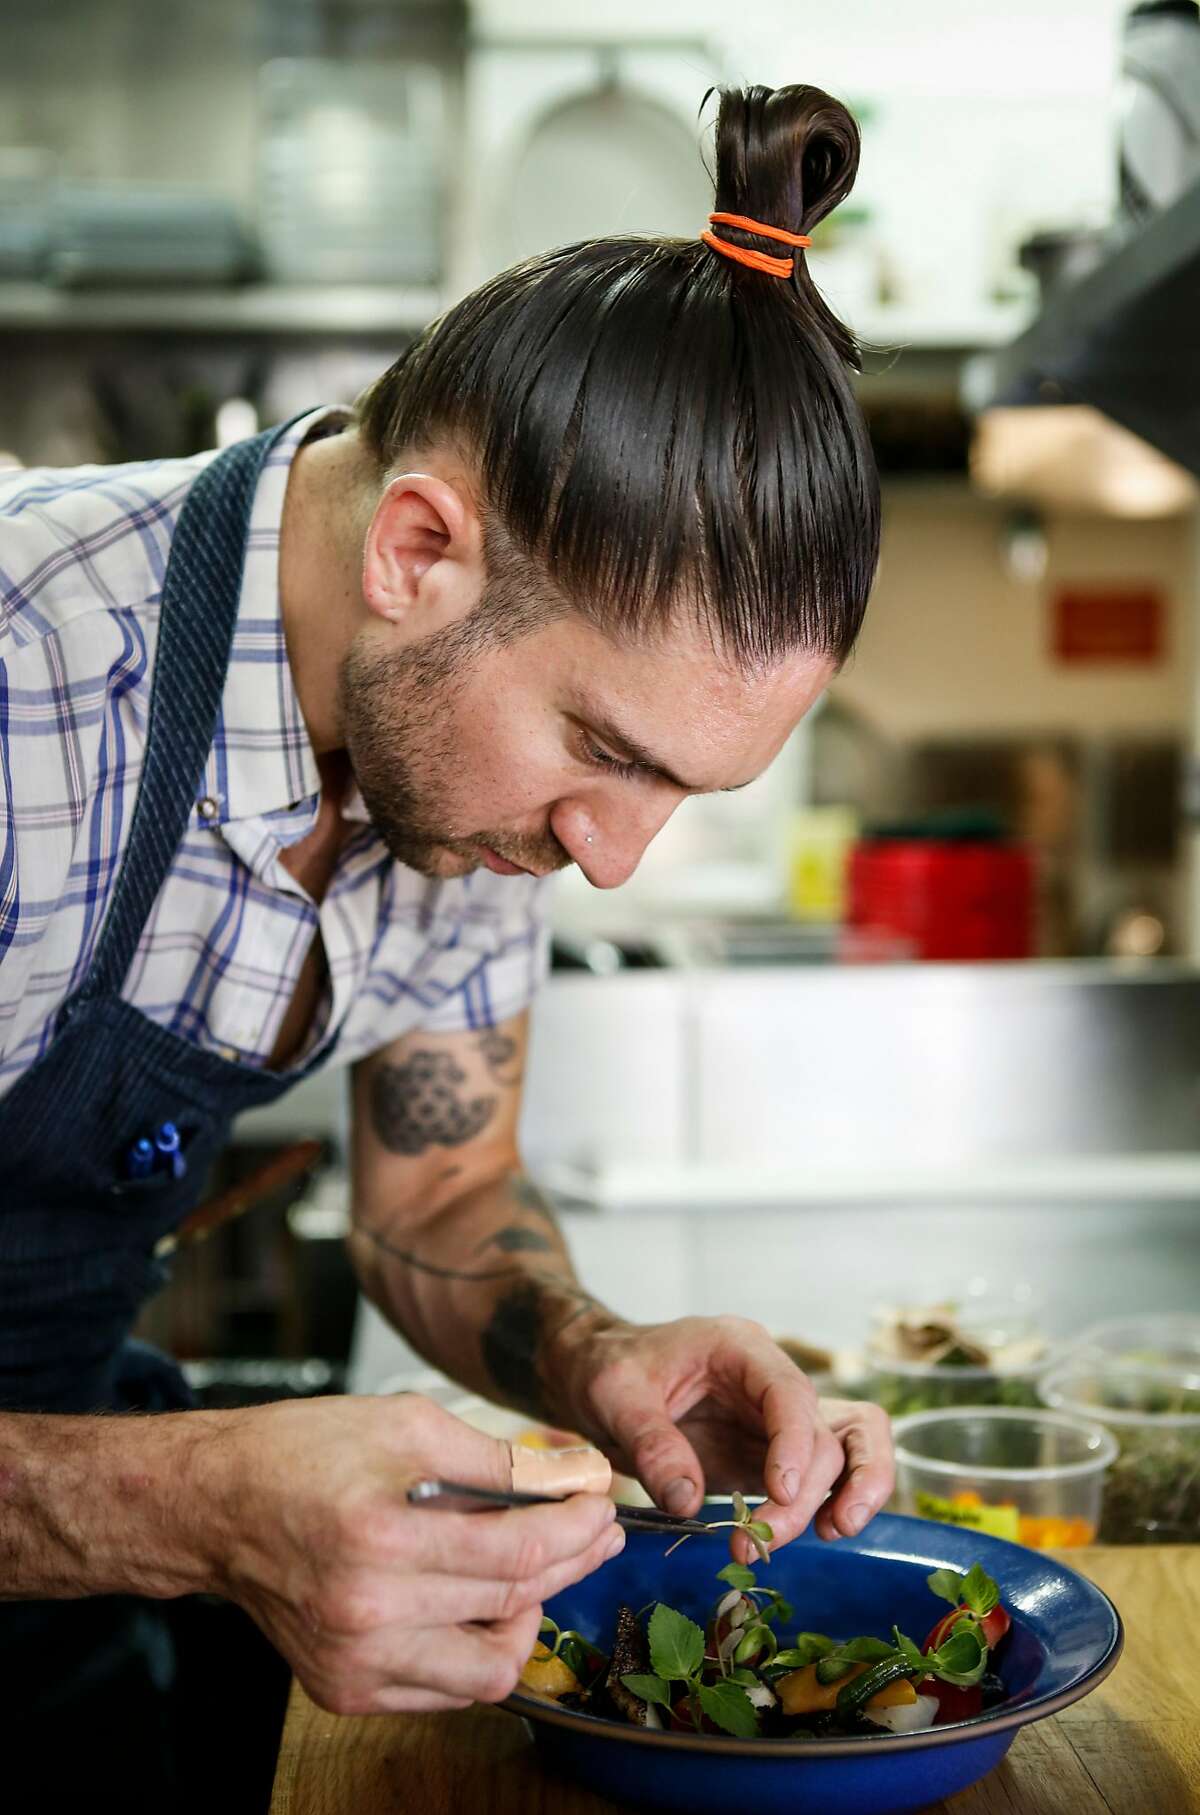 Al's Place chef/owner Aaron London plates a dish of Stone Fruit Curry, Black Lime-cod, Green Bean and Blueberry on Monday, Aug. 17, 2015 in San Francisco, Calif.